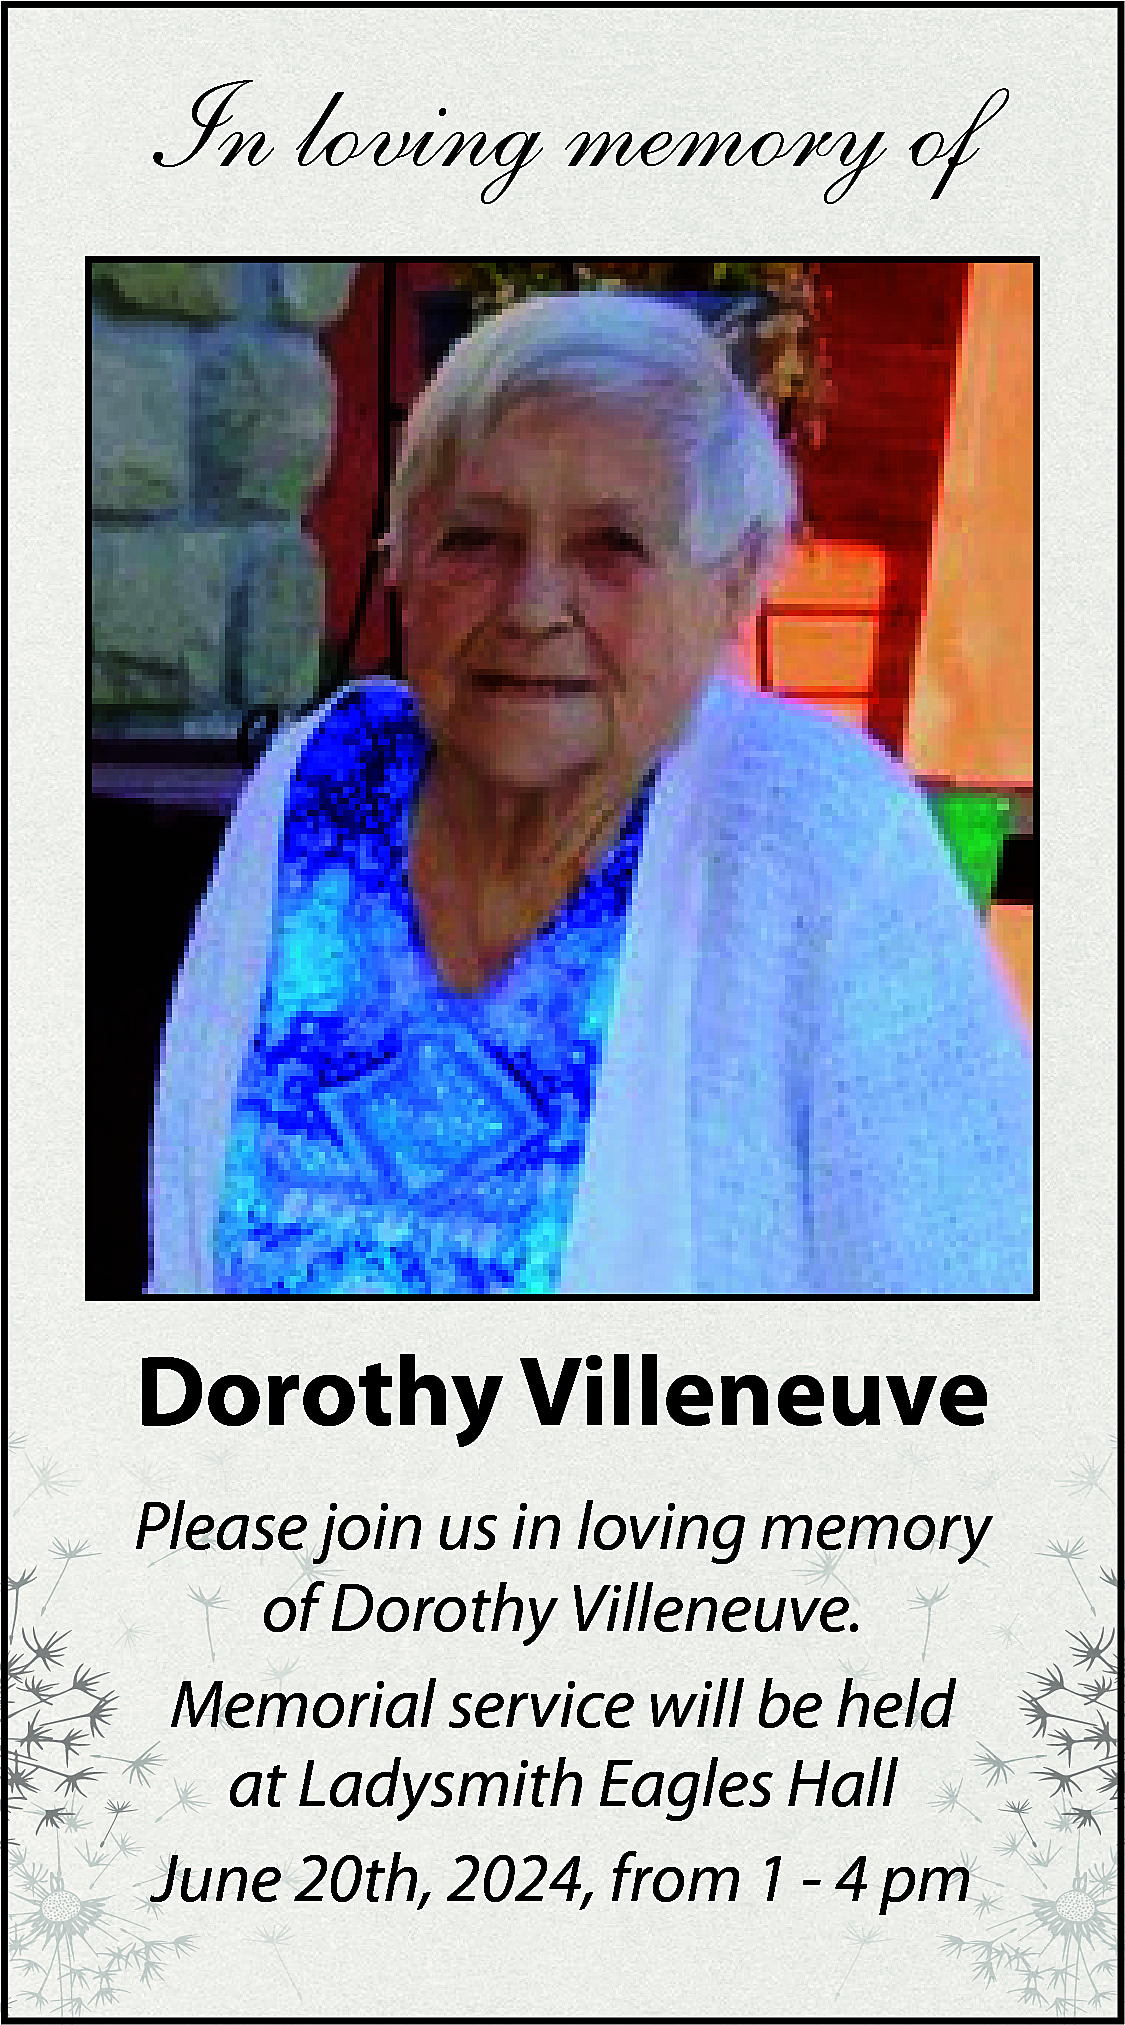 In loving memory of <br>  In loving memory of    Dorothy Villeneuve  Please join us in loving memory  of Dorothy Villeneuve.  Memorial service will be held  at Ladysmith Eagles Hall  June 20th, 2024, from 1 - 4 pm    